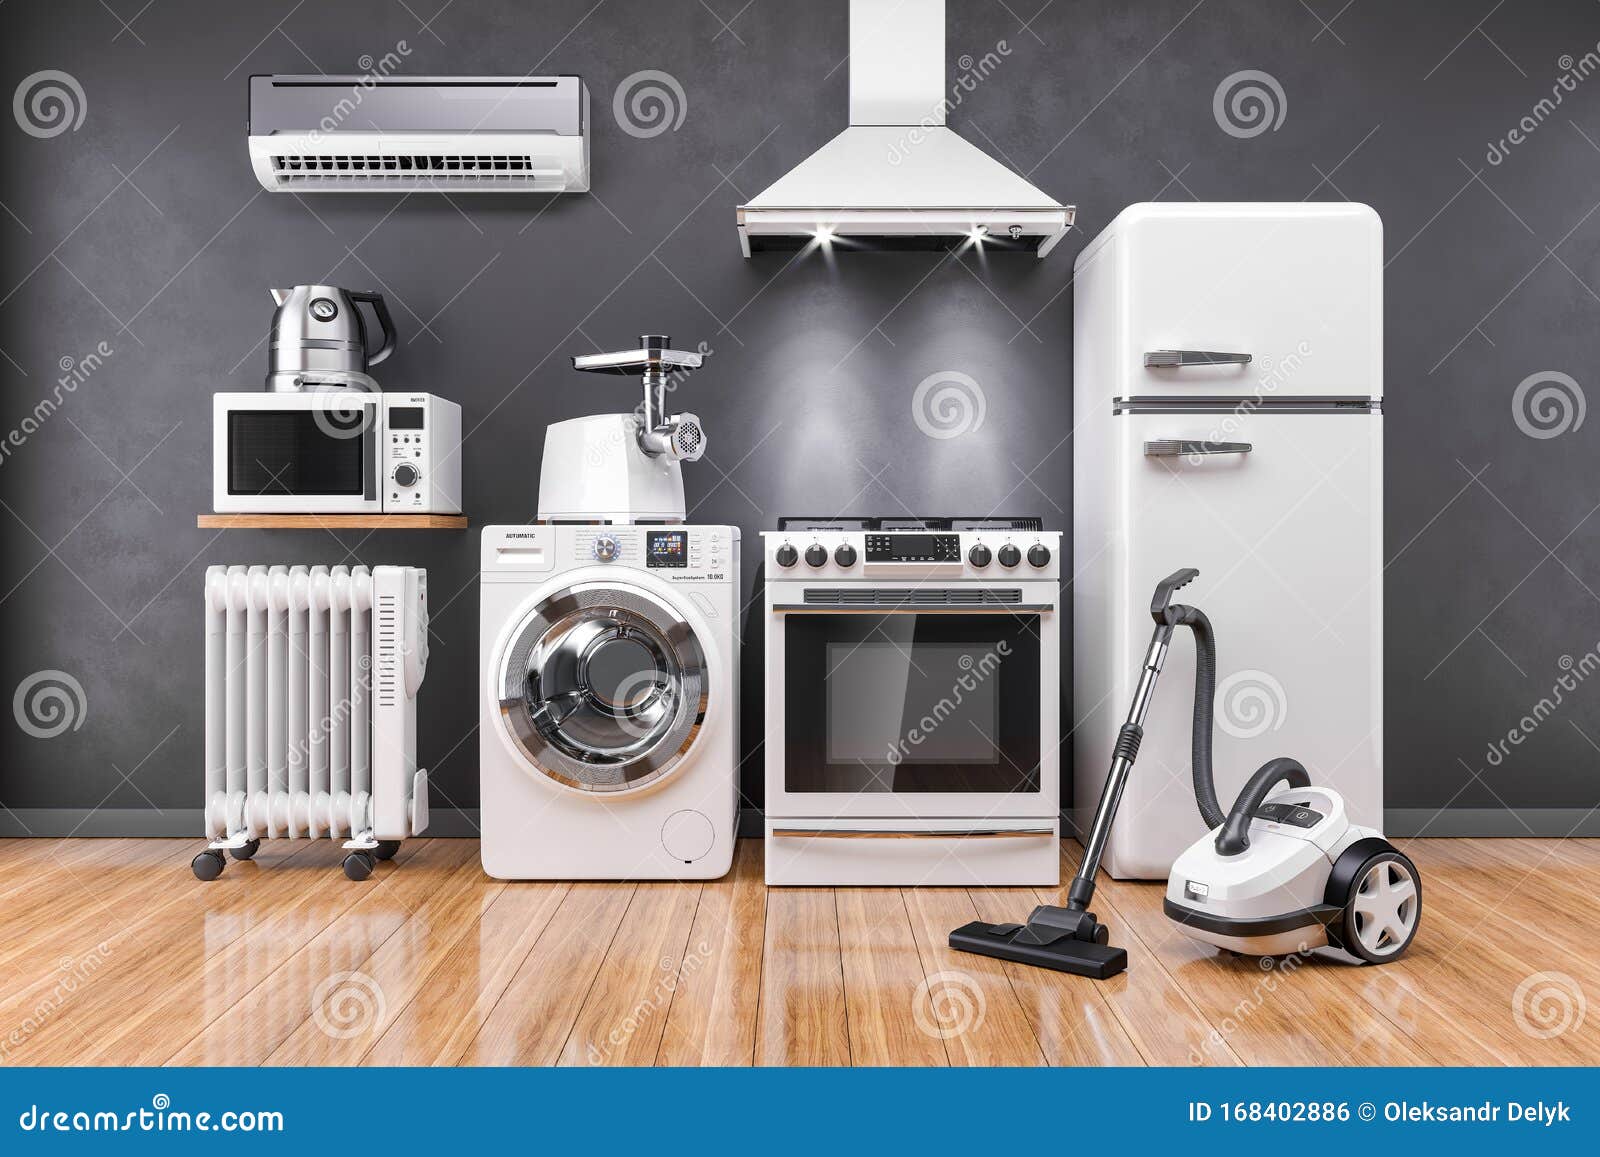 Set Of Home Kitchen Appliances In The Room On The Wall Background Stock Illustration Illustration Of Group Heater 168402886